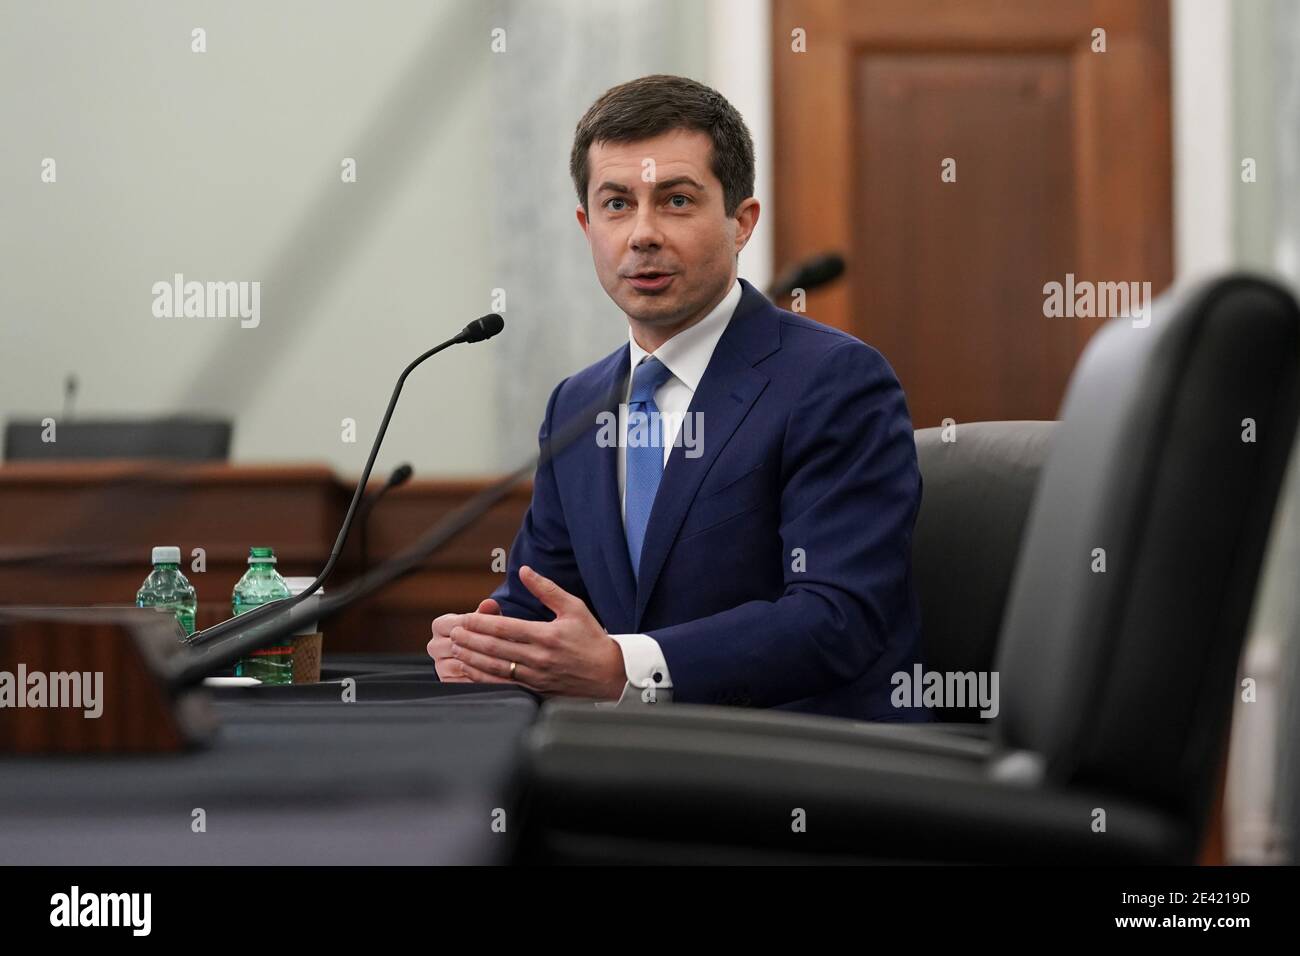 Pete Buttigieg, U.S. secretary of transportation nominee for U.S. President Joe Biden, speaks during a Senate Commerce, Science and Transportation Committee confirmation hearing in Washington, DC, U.S., on Thursday, Jan. 21, 2021. Buttigieg, is pledging to carry out the administration's ambitious agenda to rebuild the nation's infrastructure, calling it a 'generational opportunity' to create new jobs, fight economic inequality and stem climate change. Credit: Stefani Reynolds/Pool via CNP /MediaPunch Stock Photo